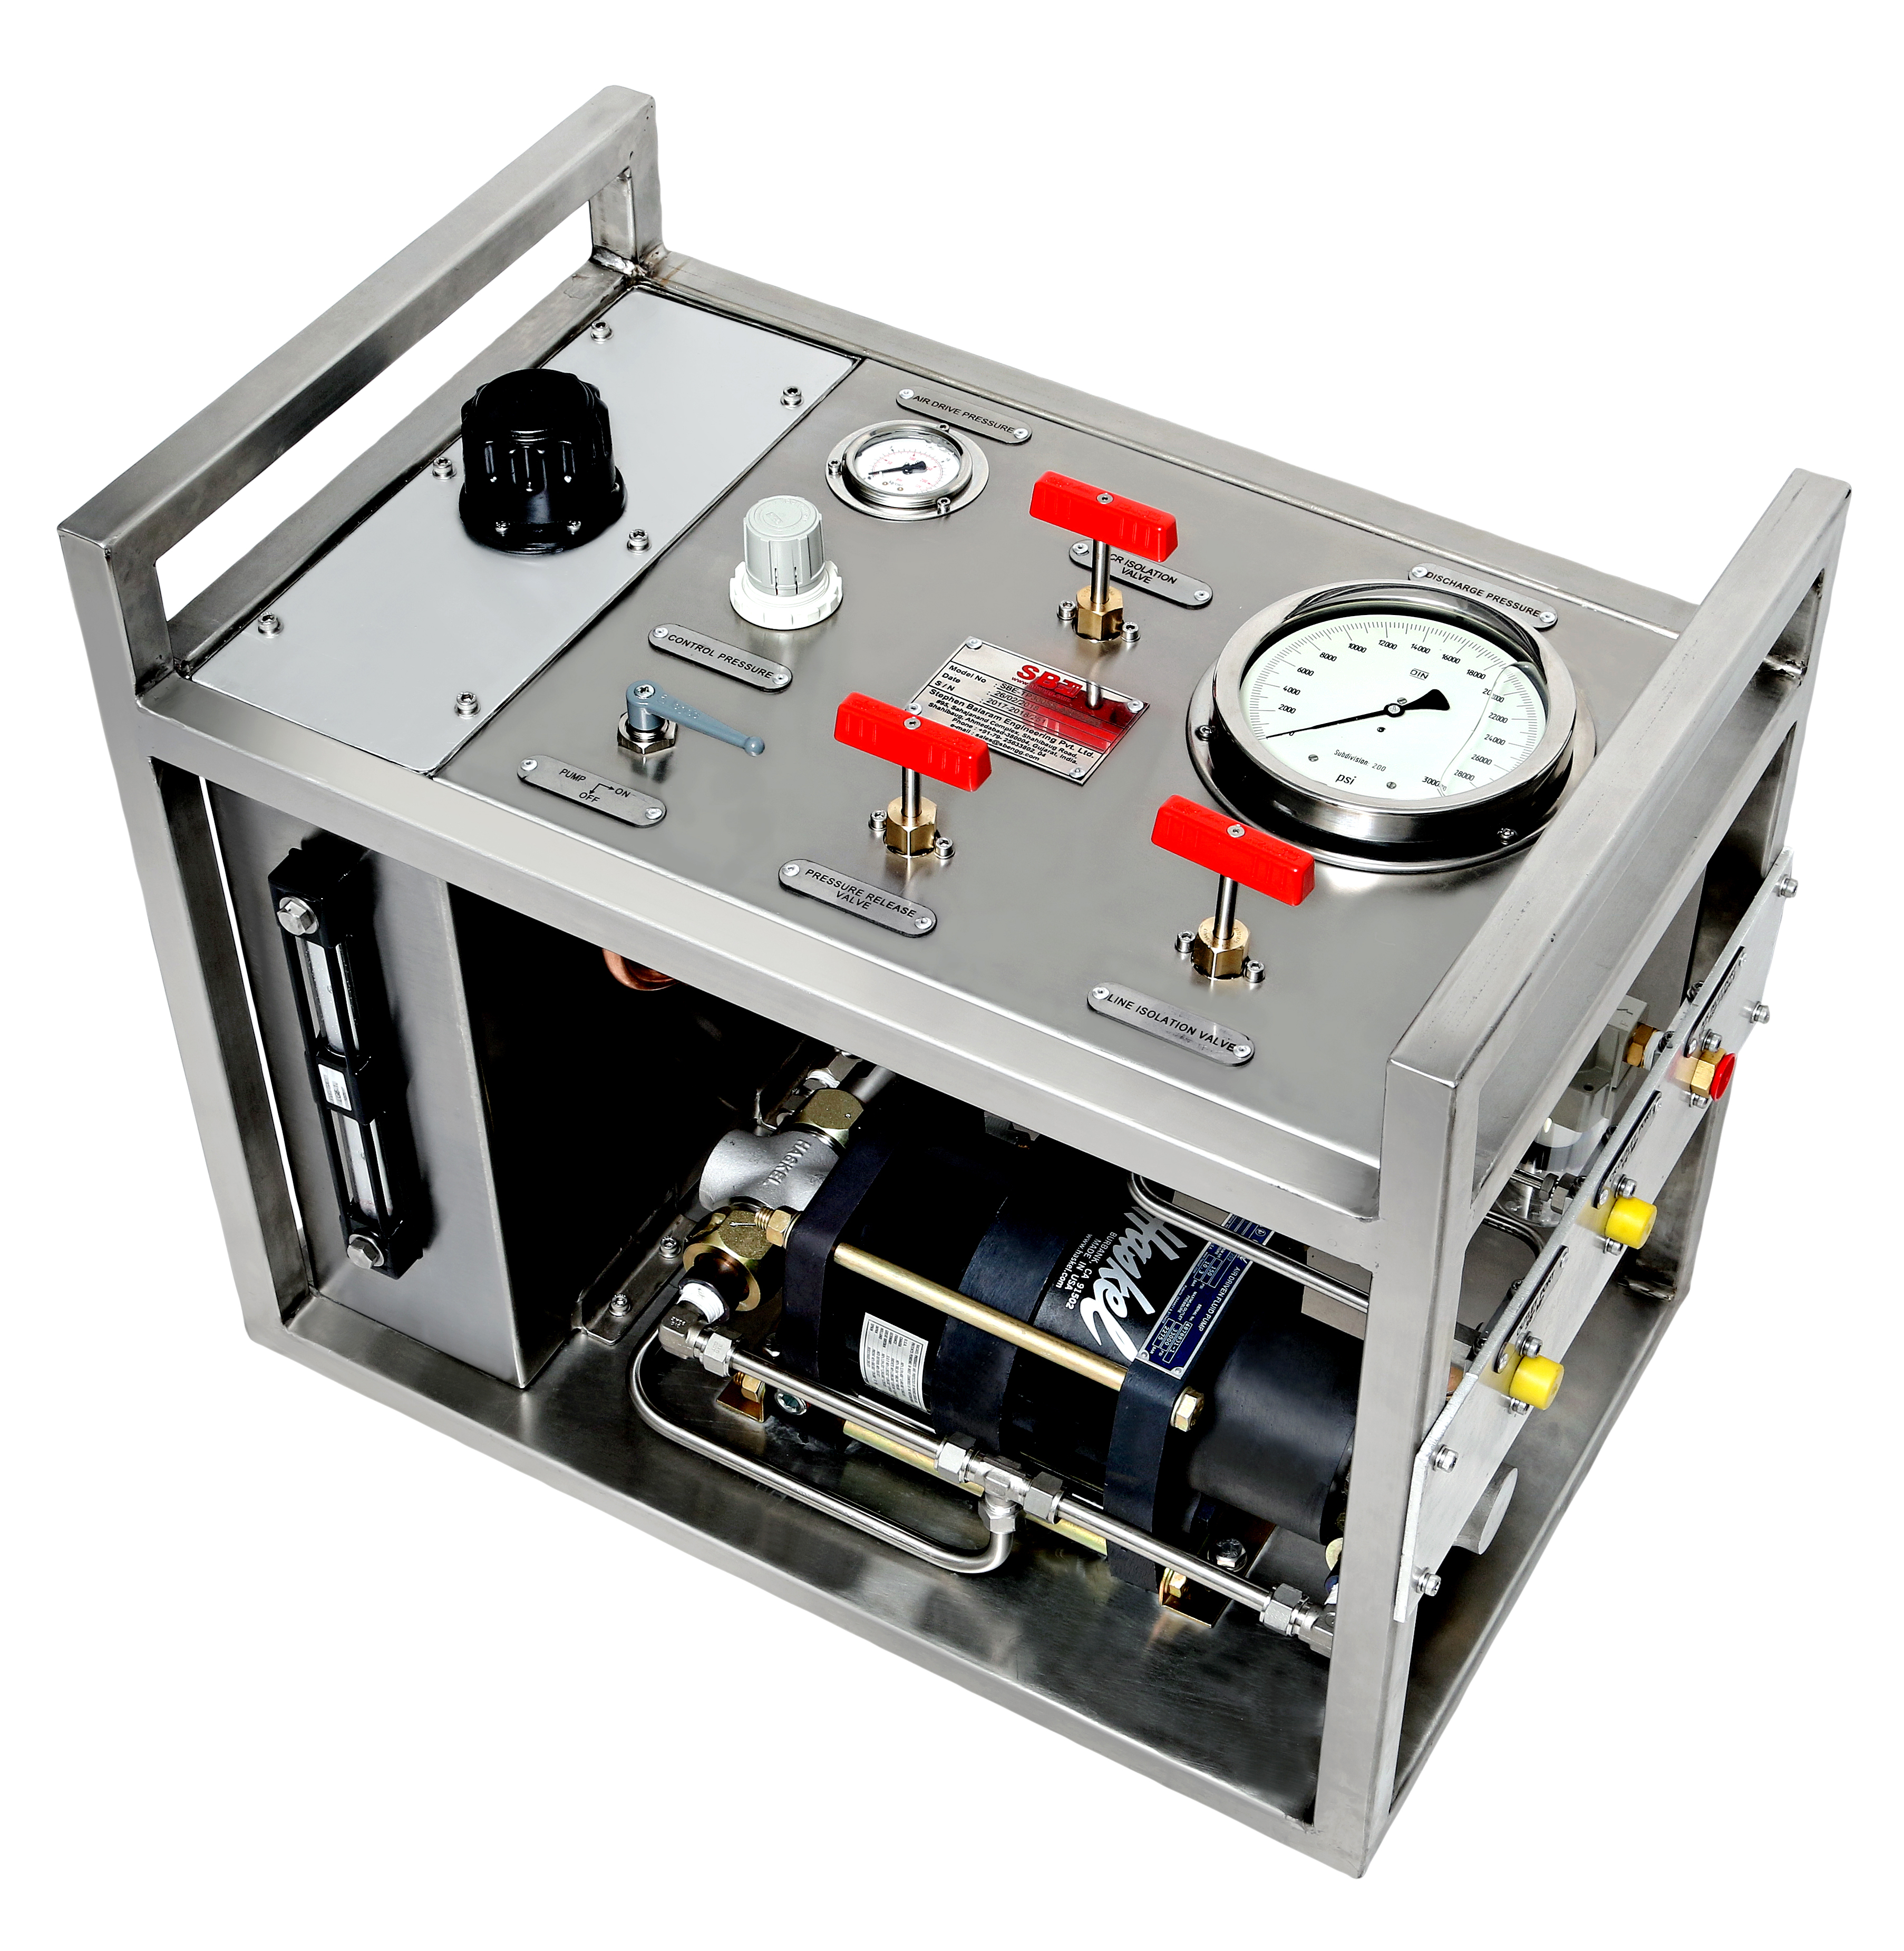 Portable “Testpac-300” pressure test pumps for offshore oil industry